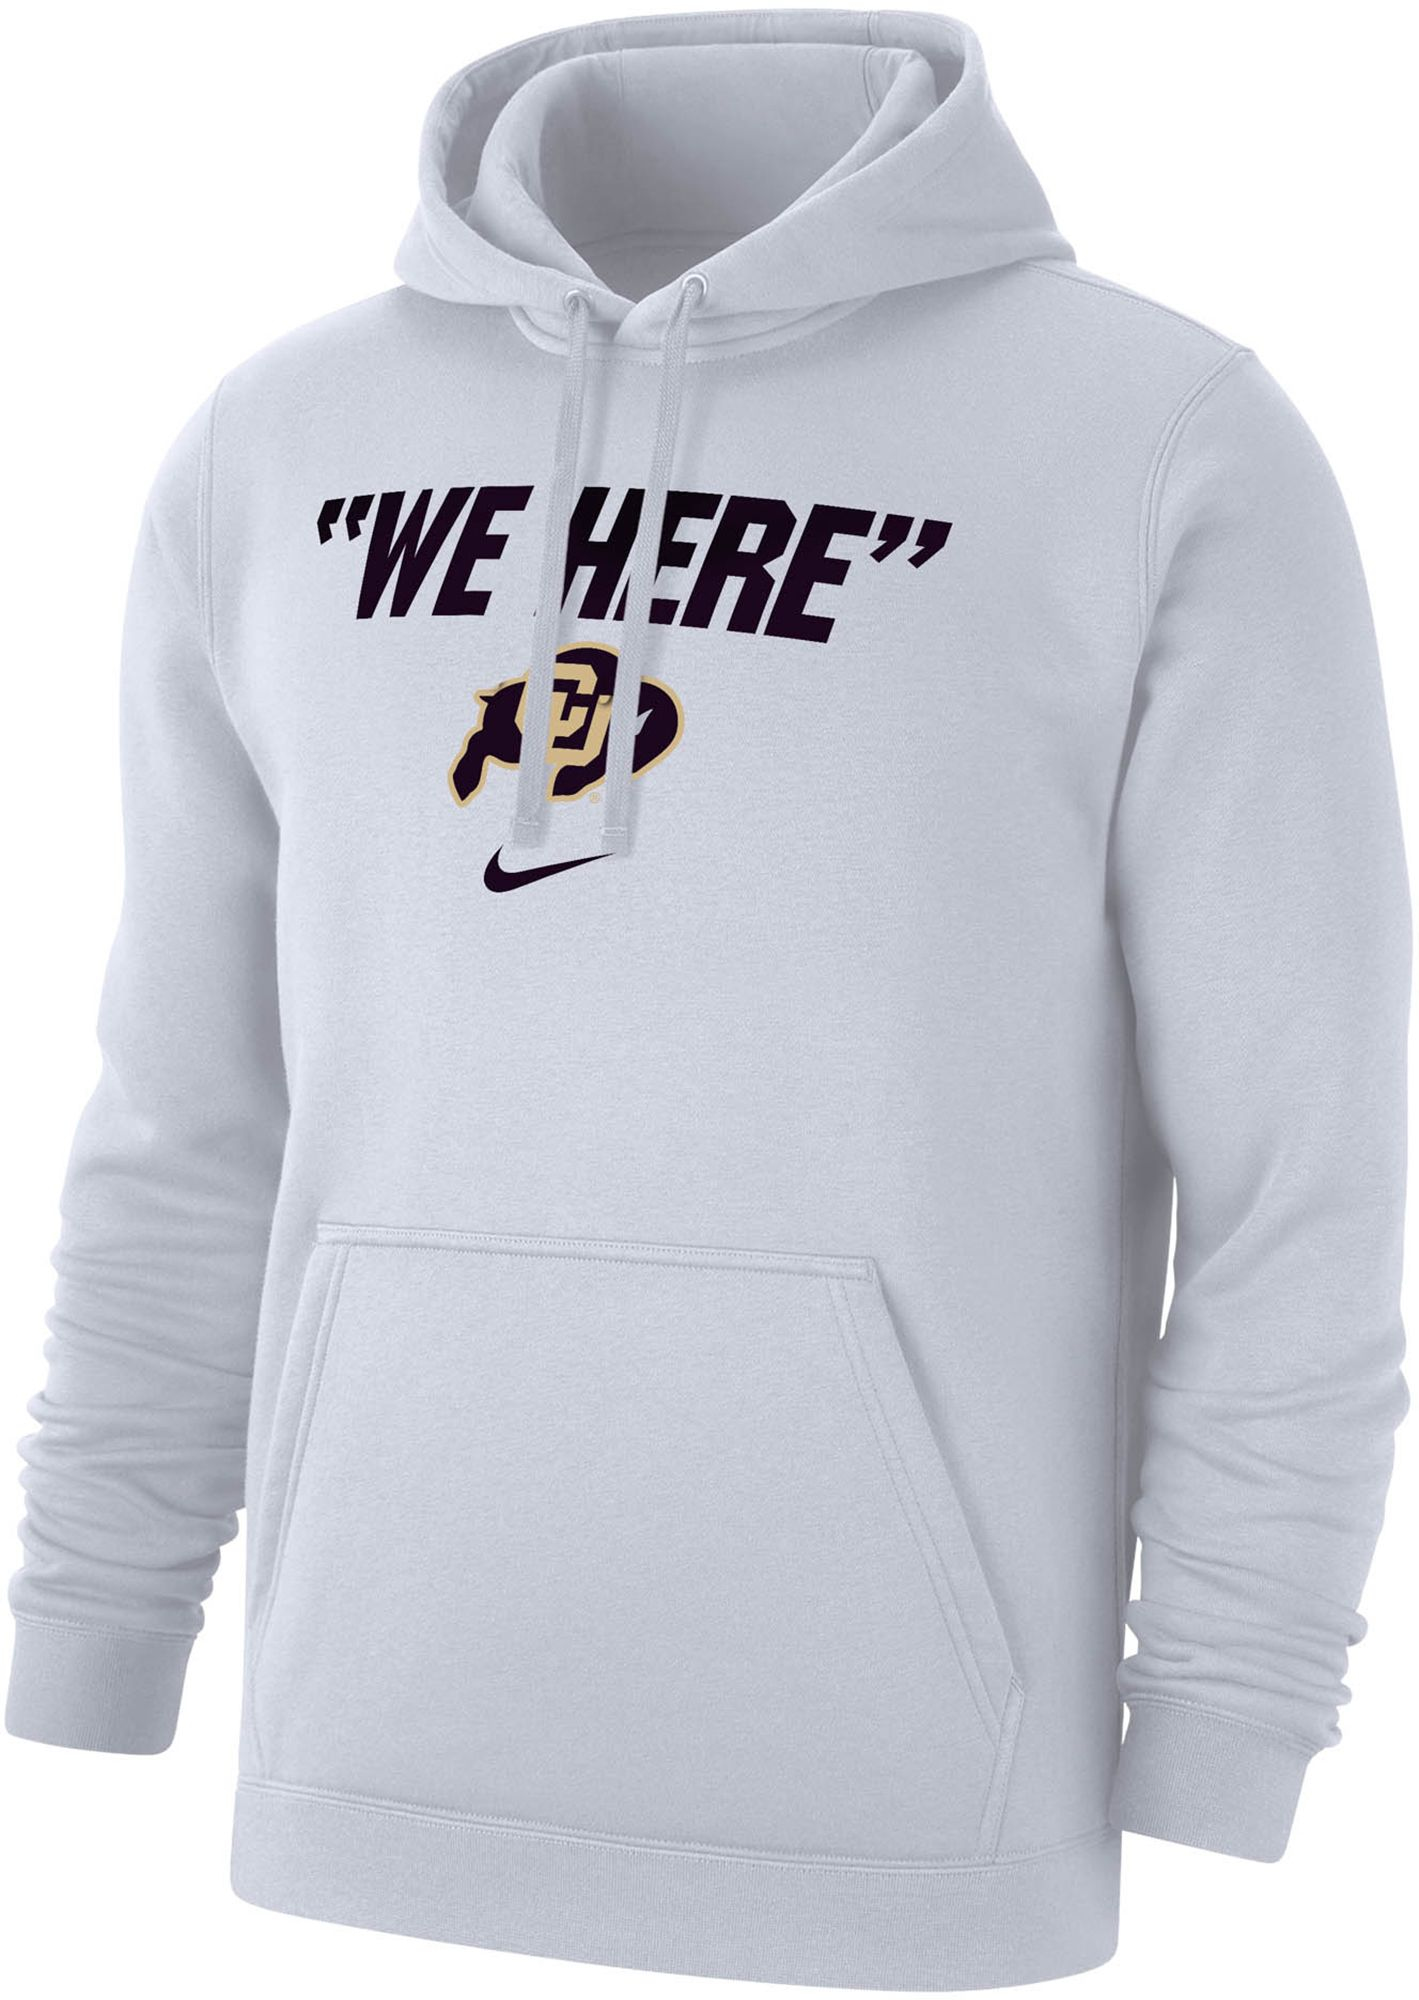 Nike Men's Colorado Buffaloes White We Here Pullover Hoodie, XXL